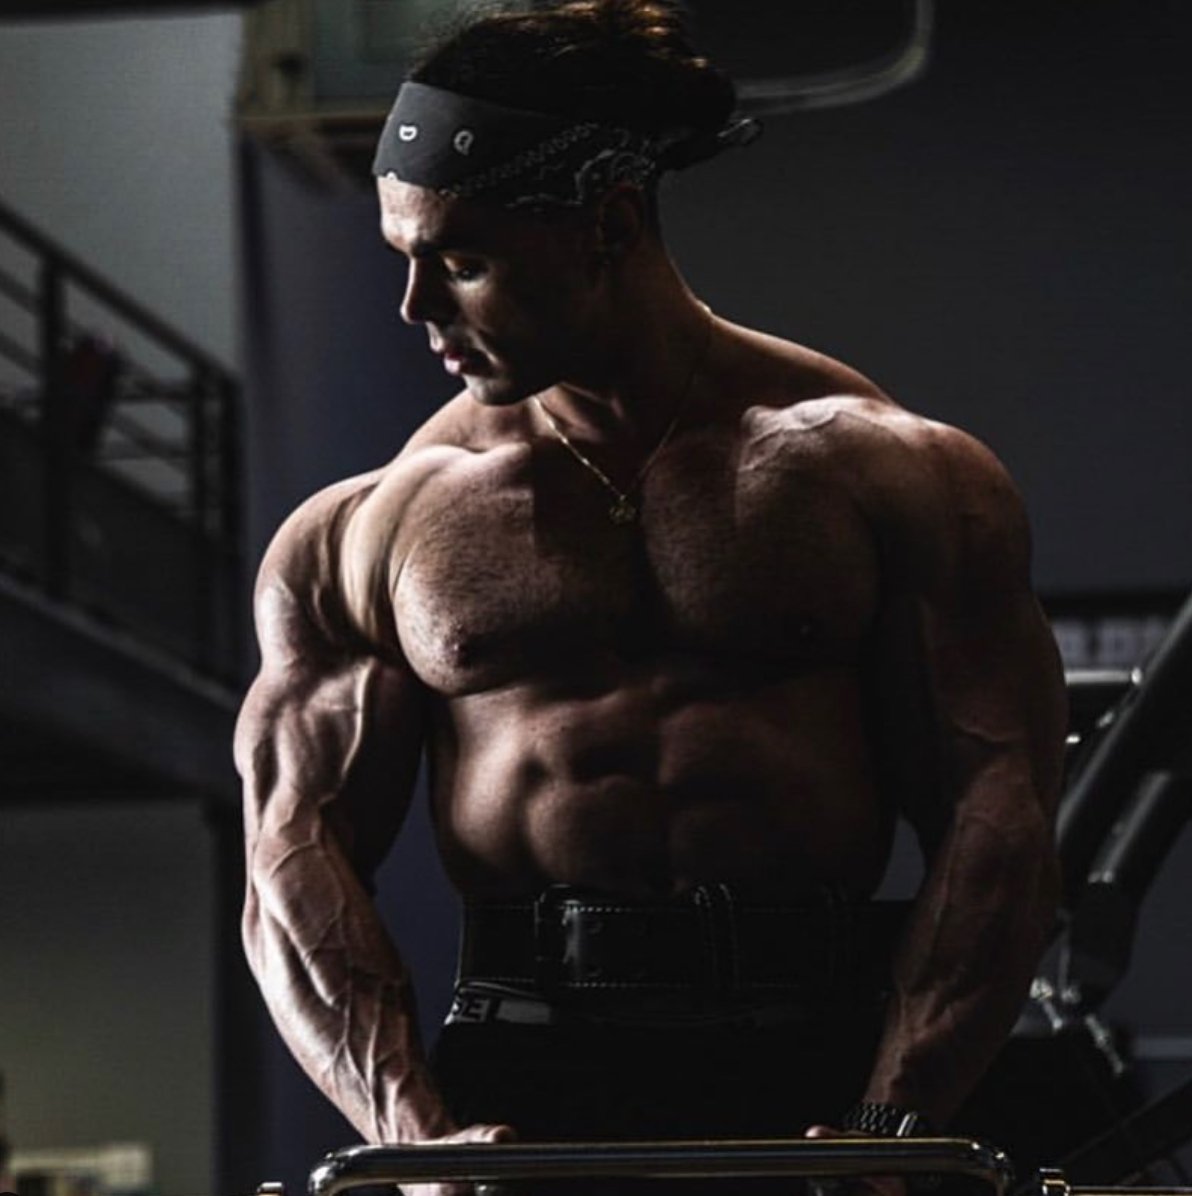 Blog - Creating the 'X' Shape physique - Bodybuilding and Sports Supplements